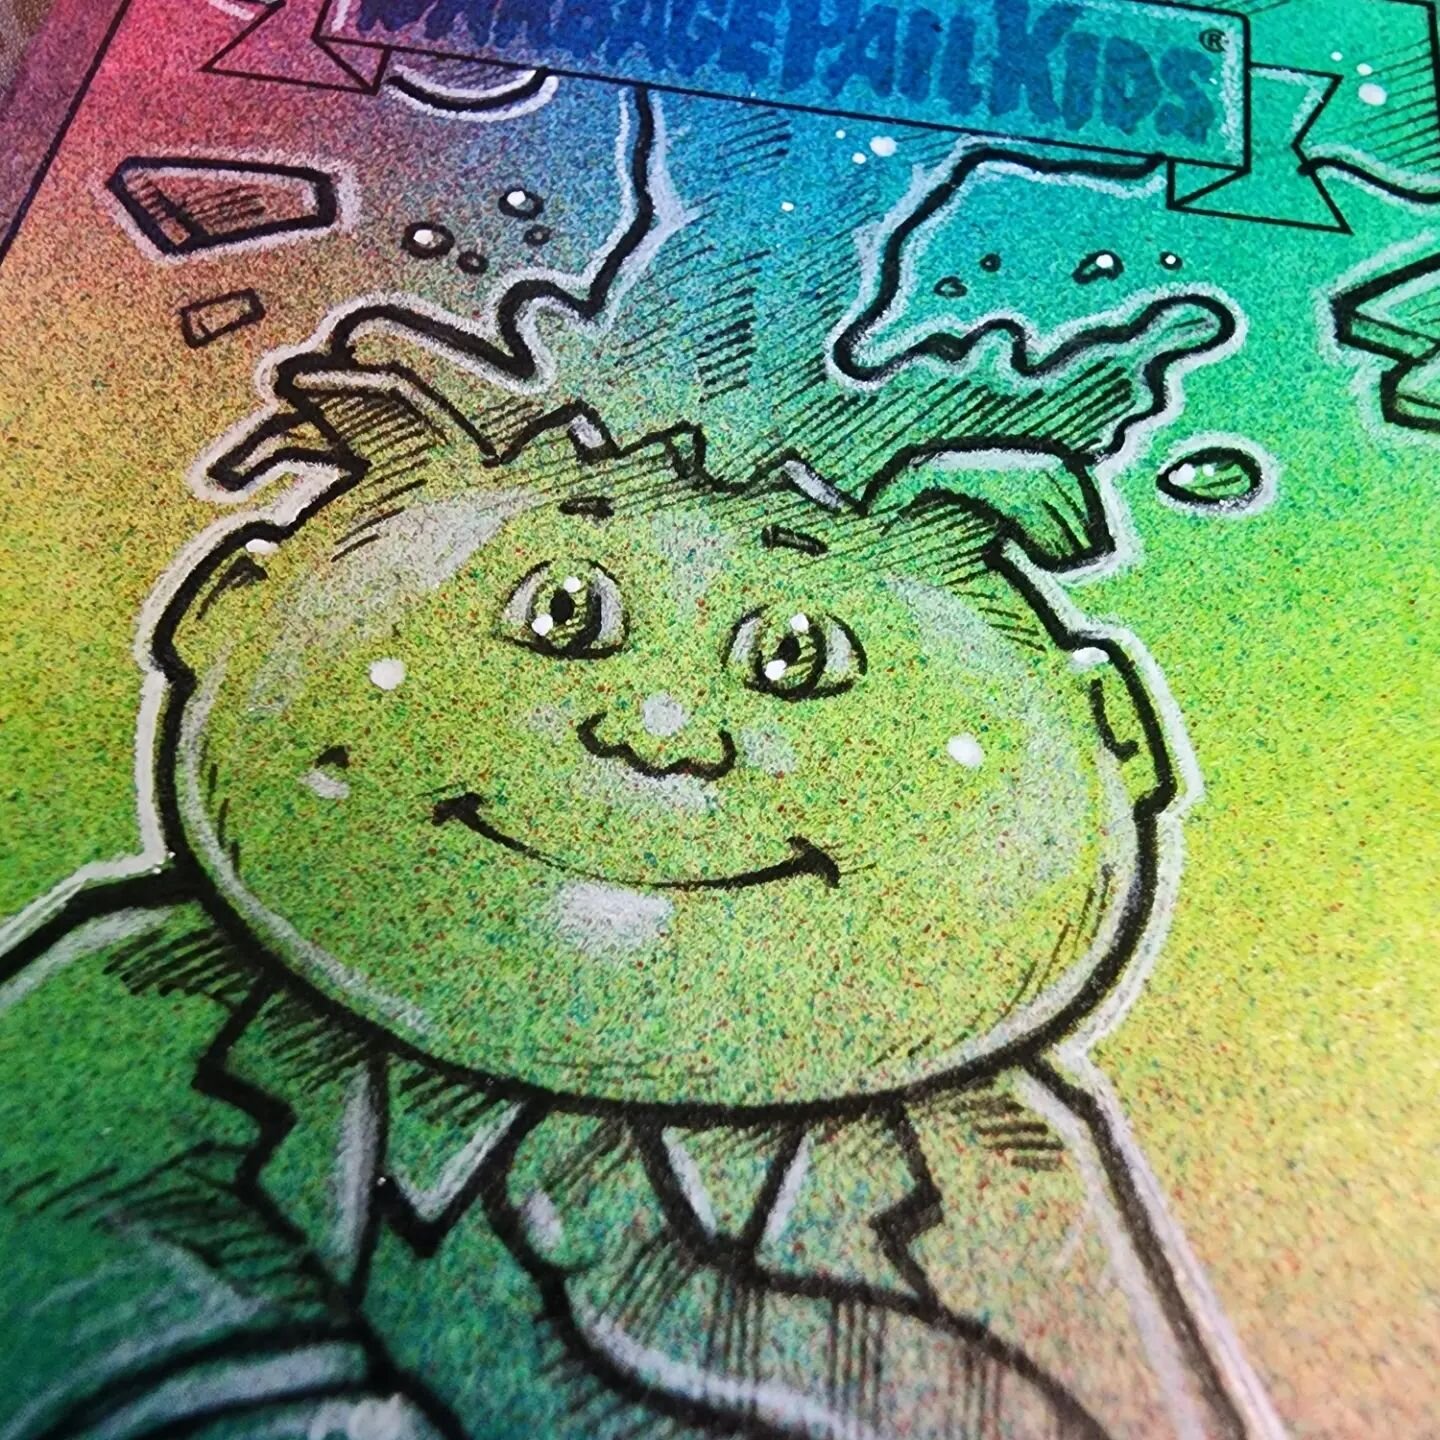 Recently completed. #garbagepailkids #gpk #tradingcards #sketchcard #Sketch #gross #80s #topps #sportscards #thehobby #airbrush #adambomb #art #artist #drawing #painting #illustration #throwback #retro